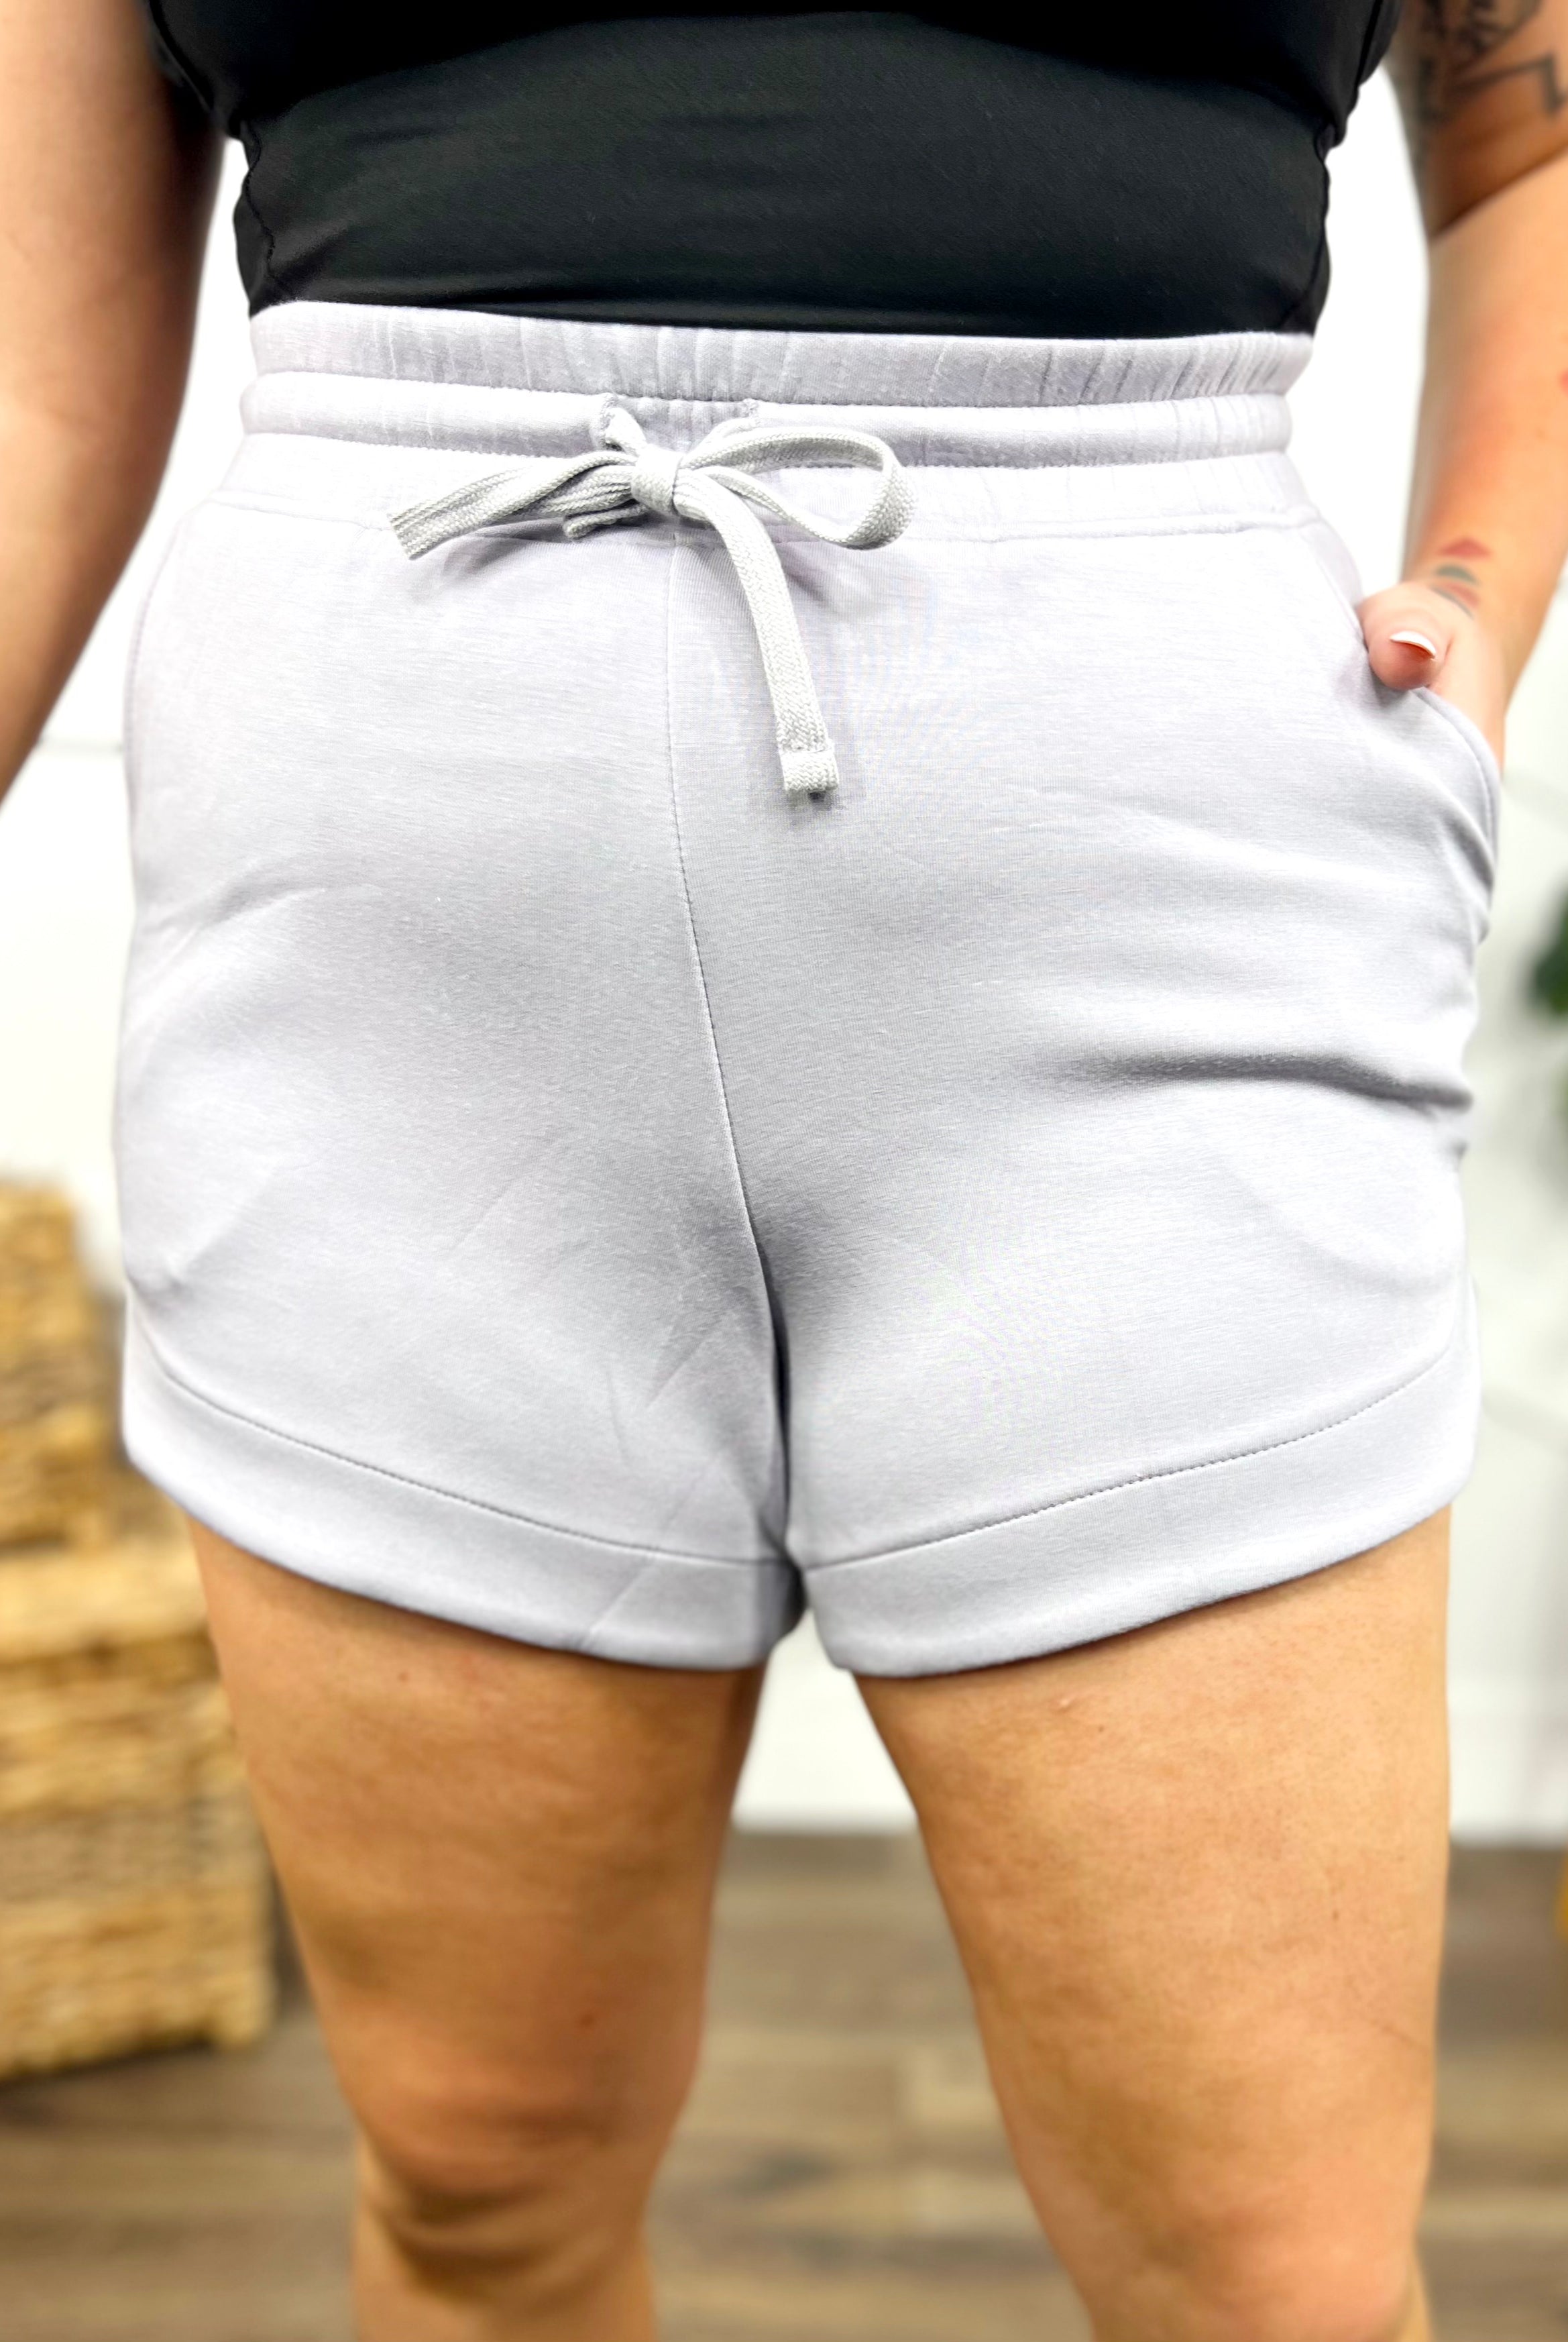 RESTOCK : Perfect Pair Shorts-160 shorts-Rae Mode-Heathered Boho Boutique, Women's Fashion and Accessories in Palmetto, FL